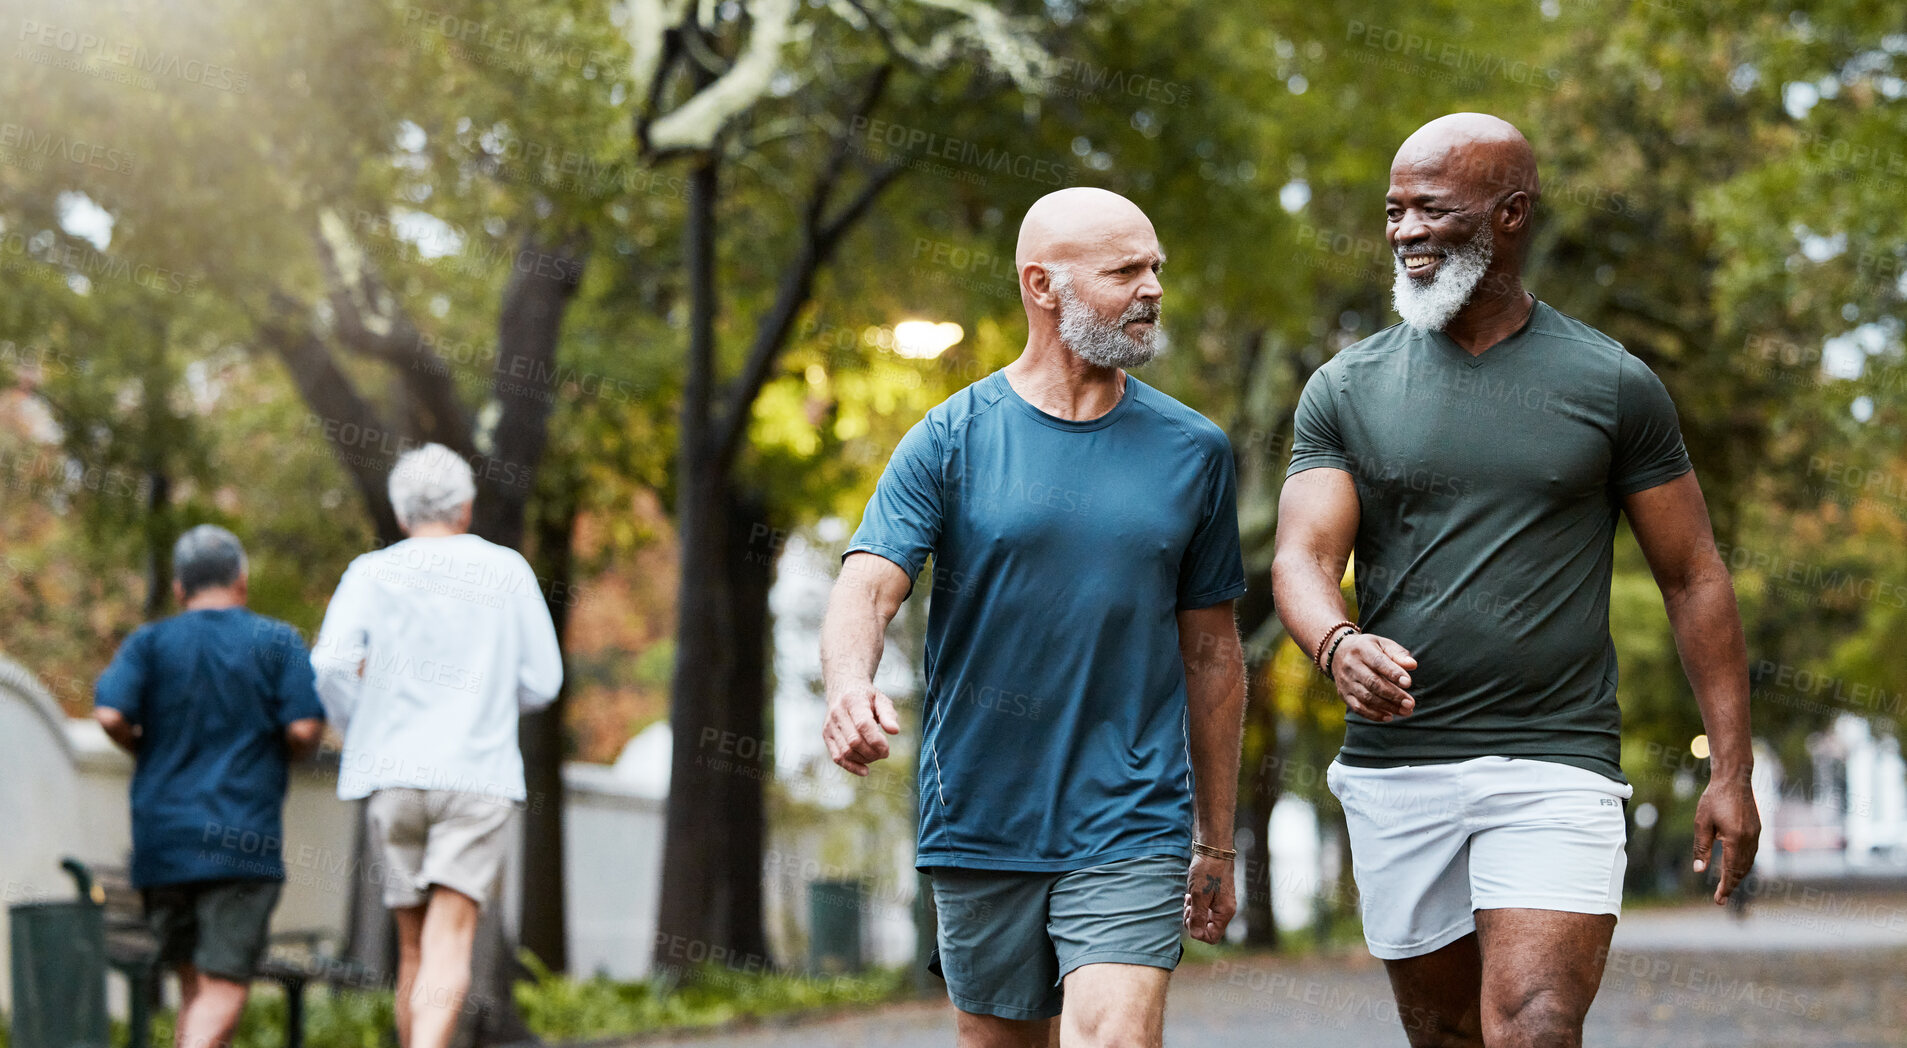 Buy stock photo Fitness, exercise and men walking together at community park while talking and doing cardio training outdoor in nature. Diversity, friends and senior man and accountability partner on a wellness walk